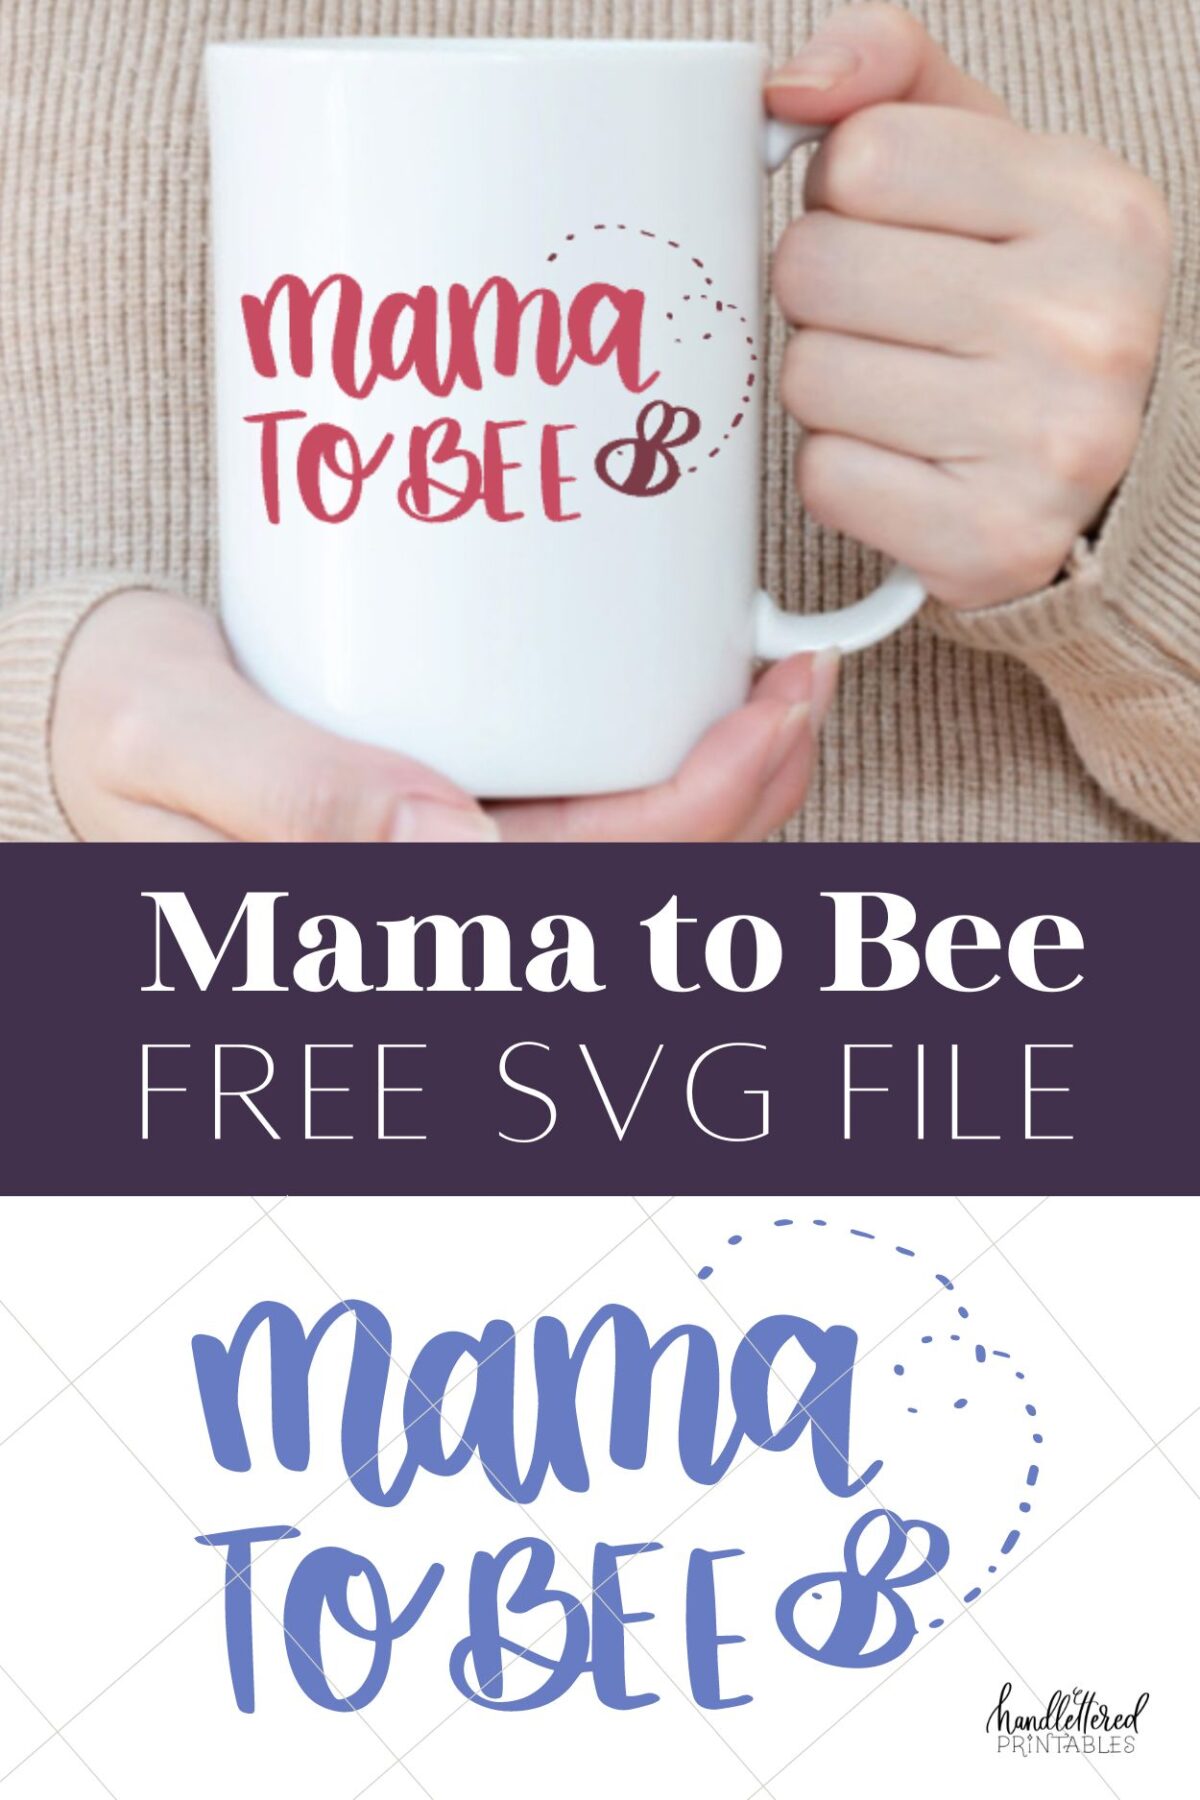 'Mama to Bee' hand lettered SVG file with illustrated bee in a brush lettering style. top image of SVG in pink vinyl on white mug being held by woman, bottom image of just the SVG in one solid color. 